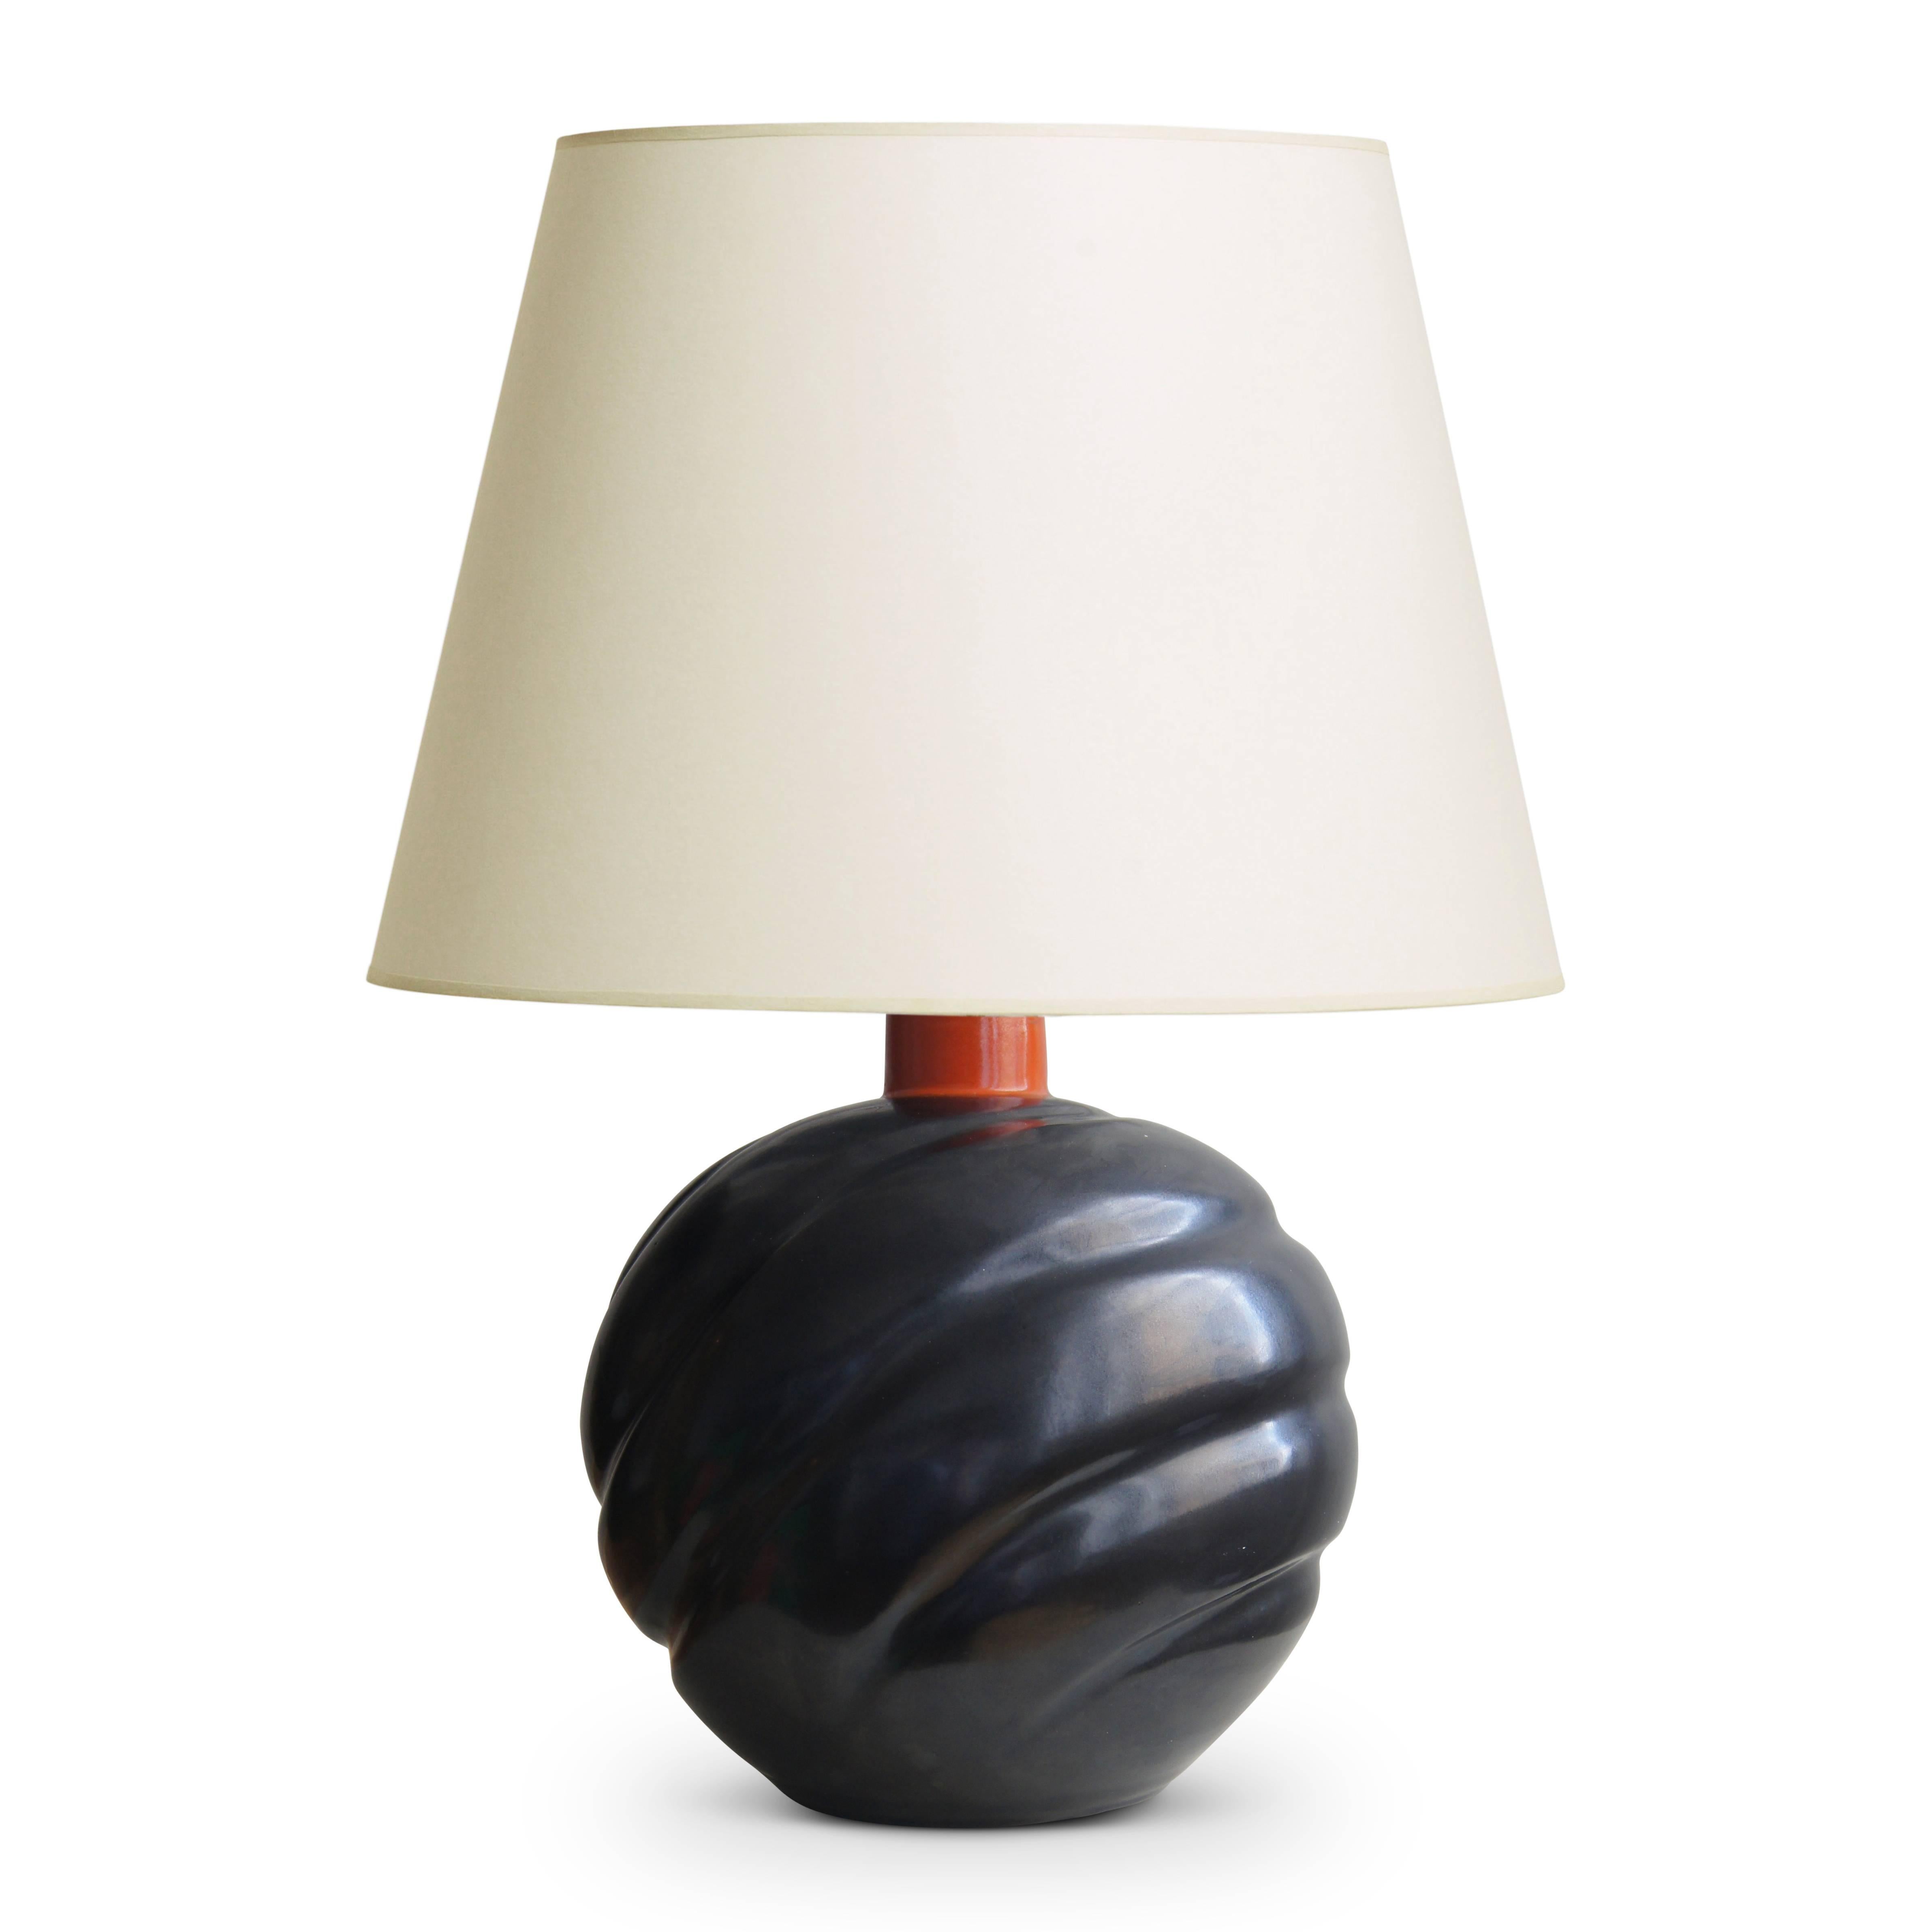 Striking and uncommon table lamp from Upsala-Ekeby, having a spherical form sculpted with an undulating pattern of concentric circles rippling across the surface at a diagonal, highlighted with a magnificent dark bronze/charcoal luster glaze with a